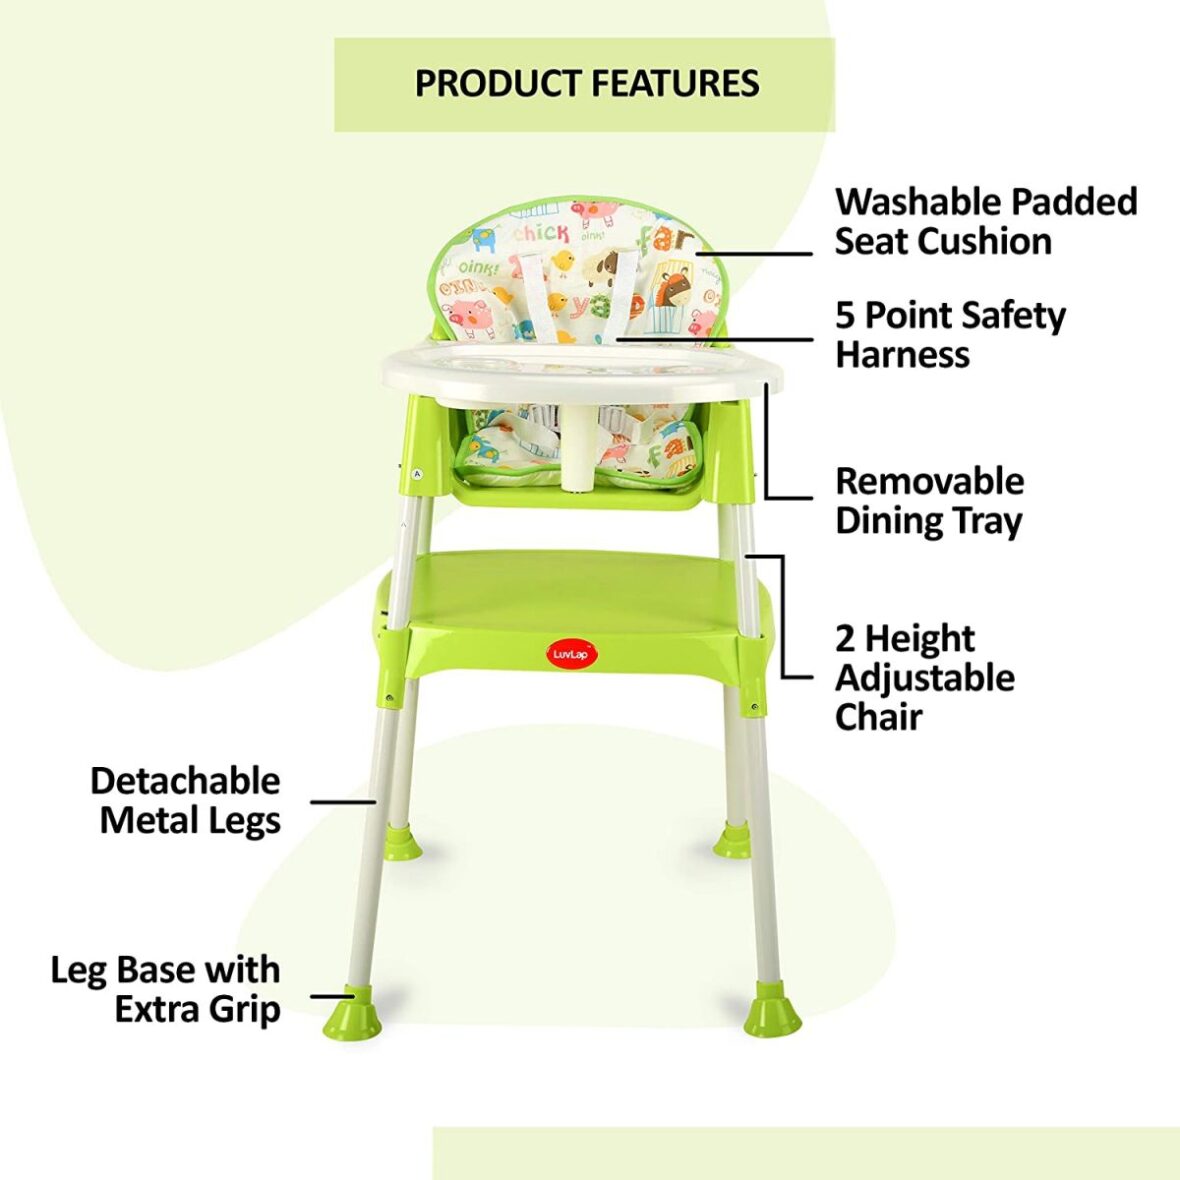 LuvLap 3-in-1 Baby High Chair, Green